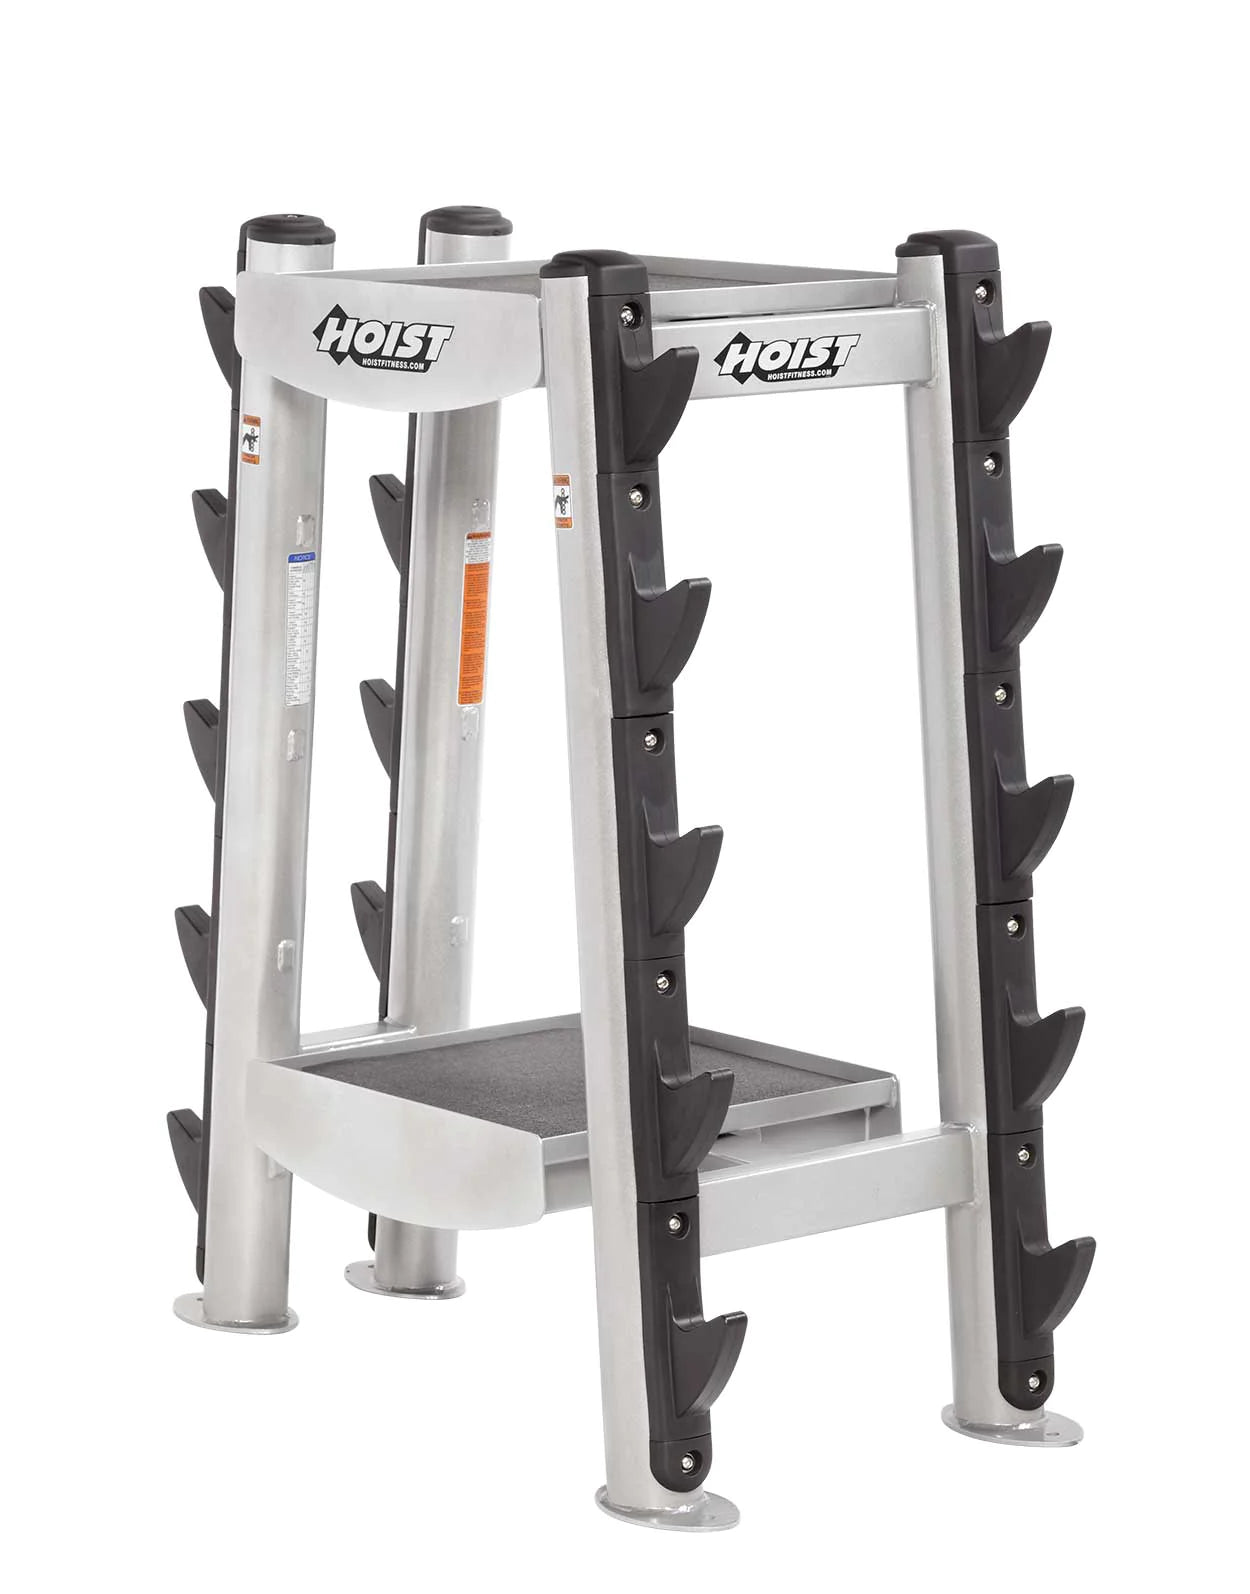 Hoist Fitness CF-3466 Accessory Rack full view | Fitness Experience